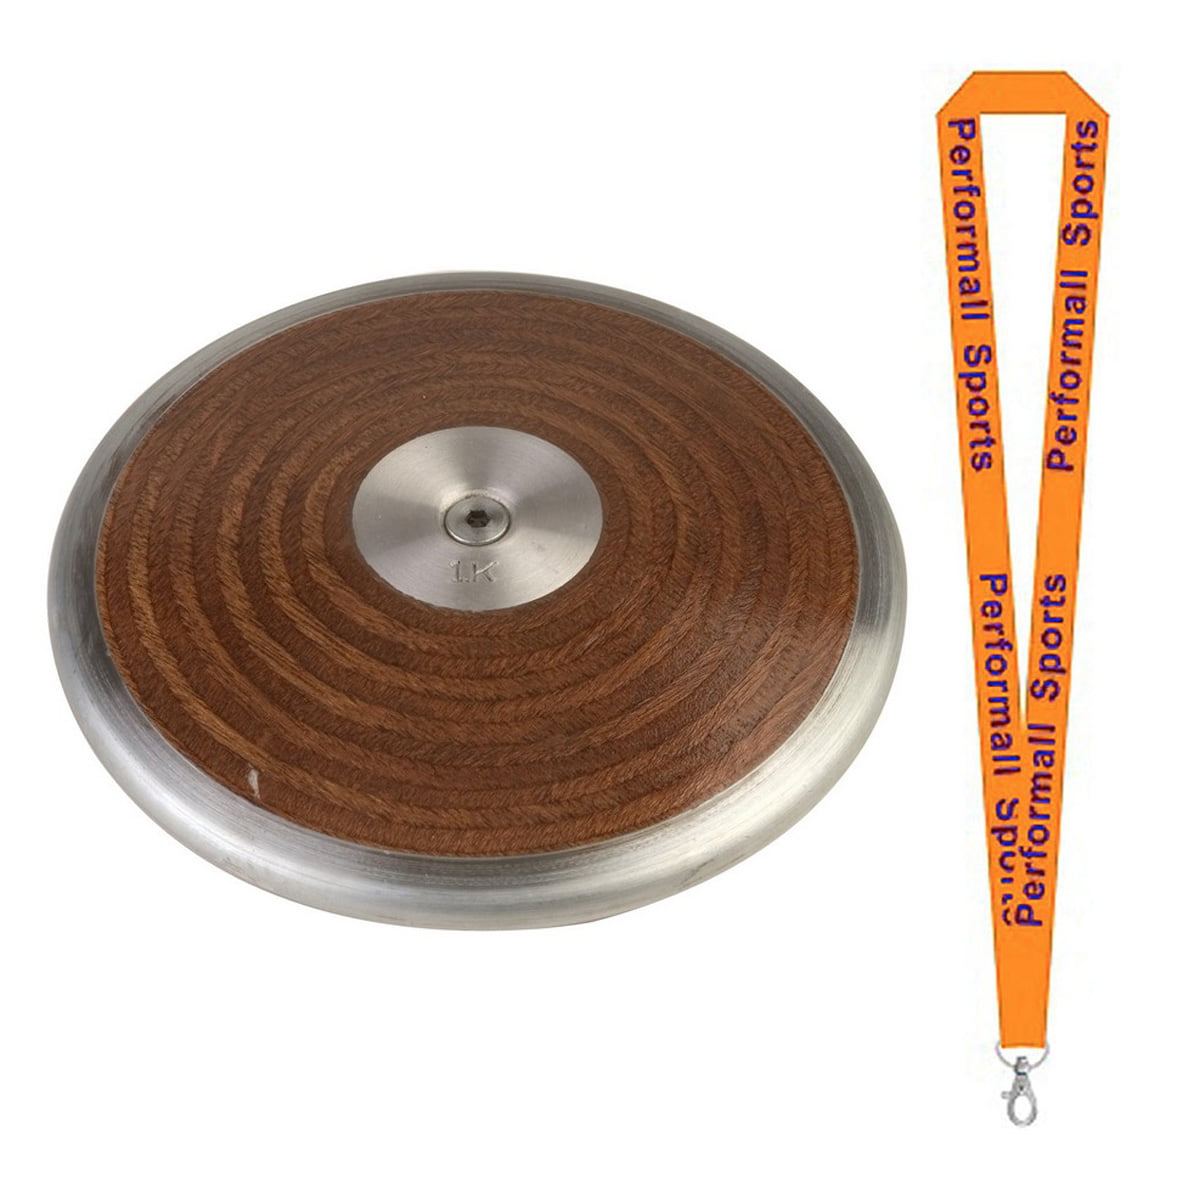 Corona Official competition weight and size 1 kilo wood laminate track & field discus